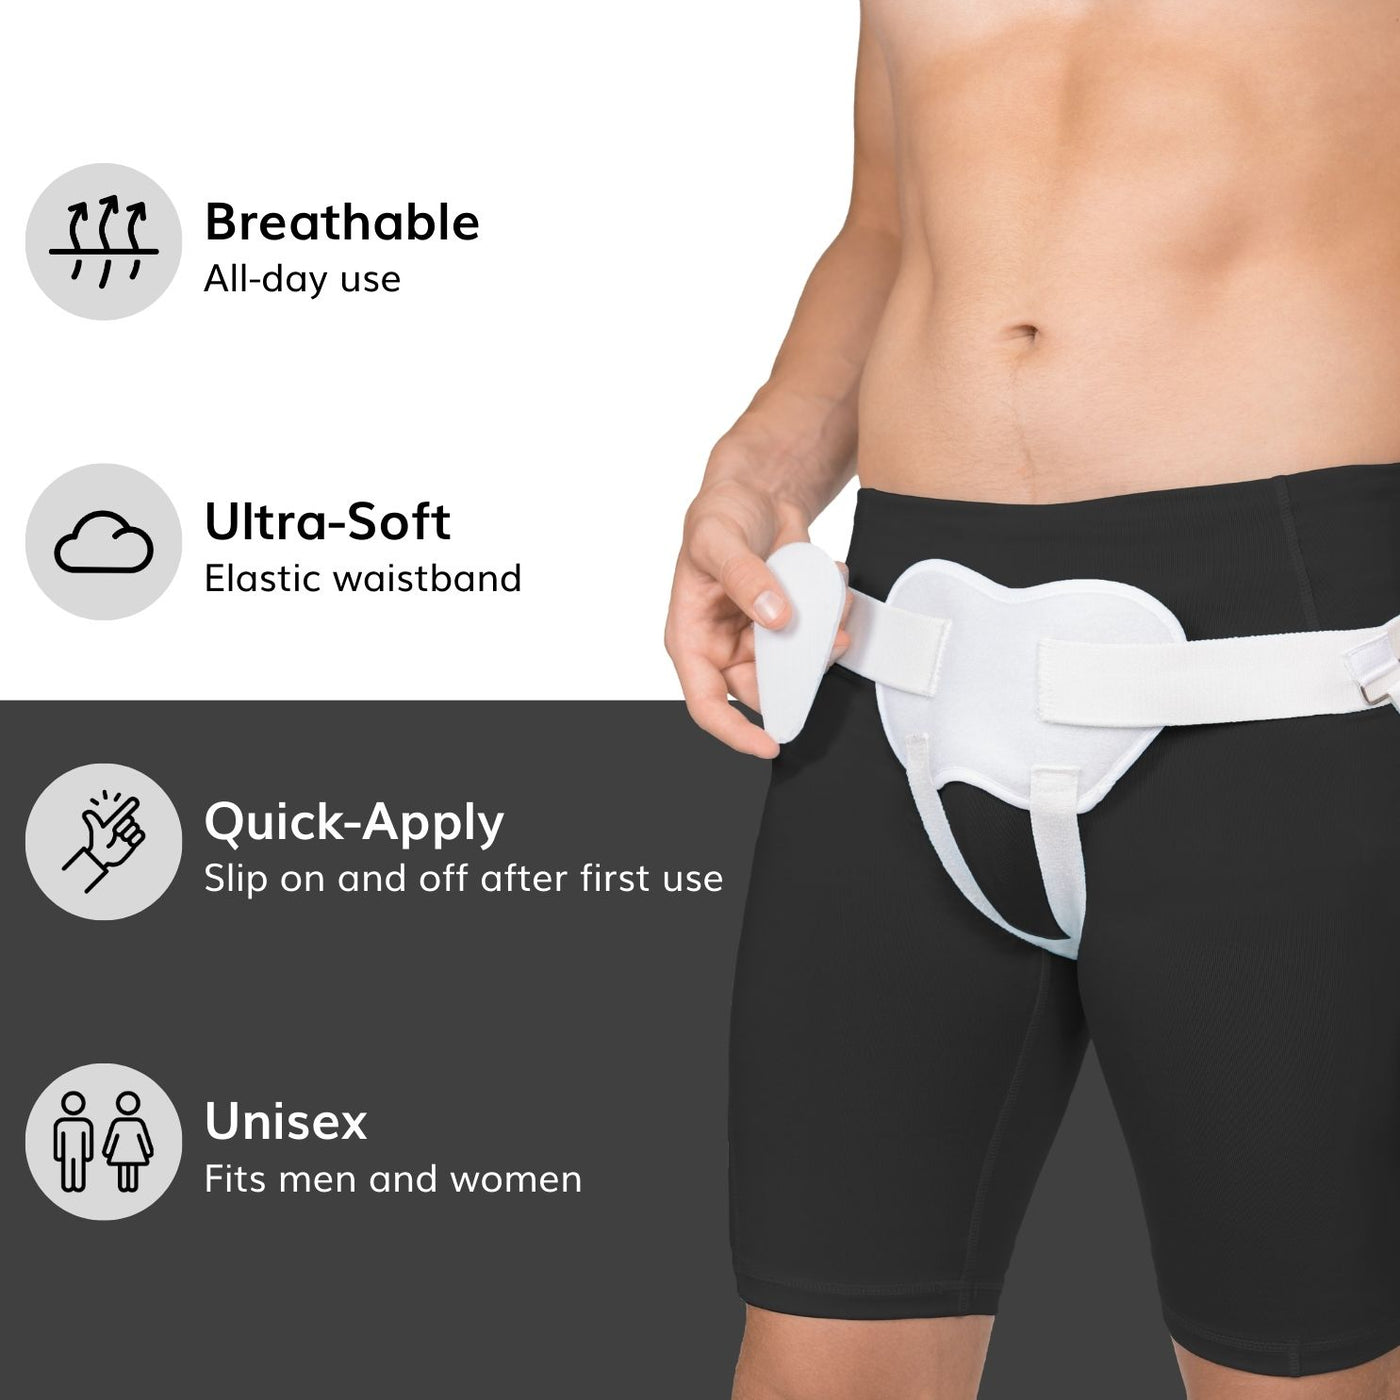 The inguinal hernia support belt is made with breathable, ultra soft materials fitting men and women